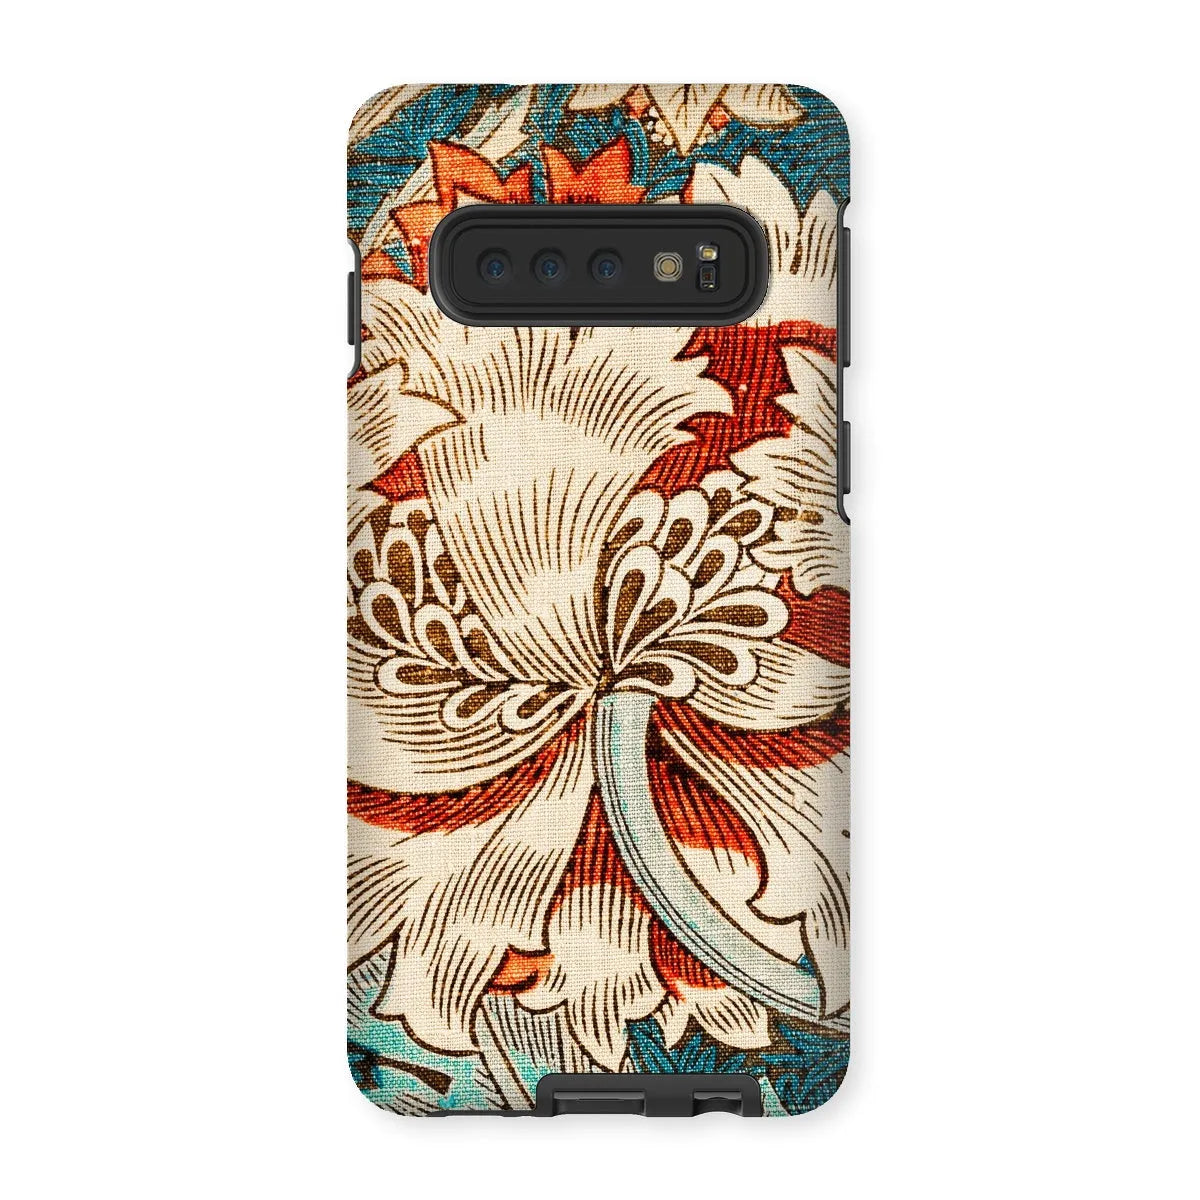 Honeysuckle Too By William Morris Phone Case - Samsung Galaxy S10 / Matte - Mobile Phone Cases - Aesthetic Art